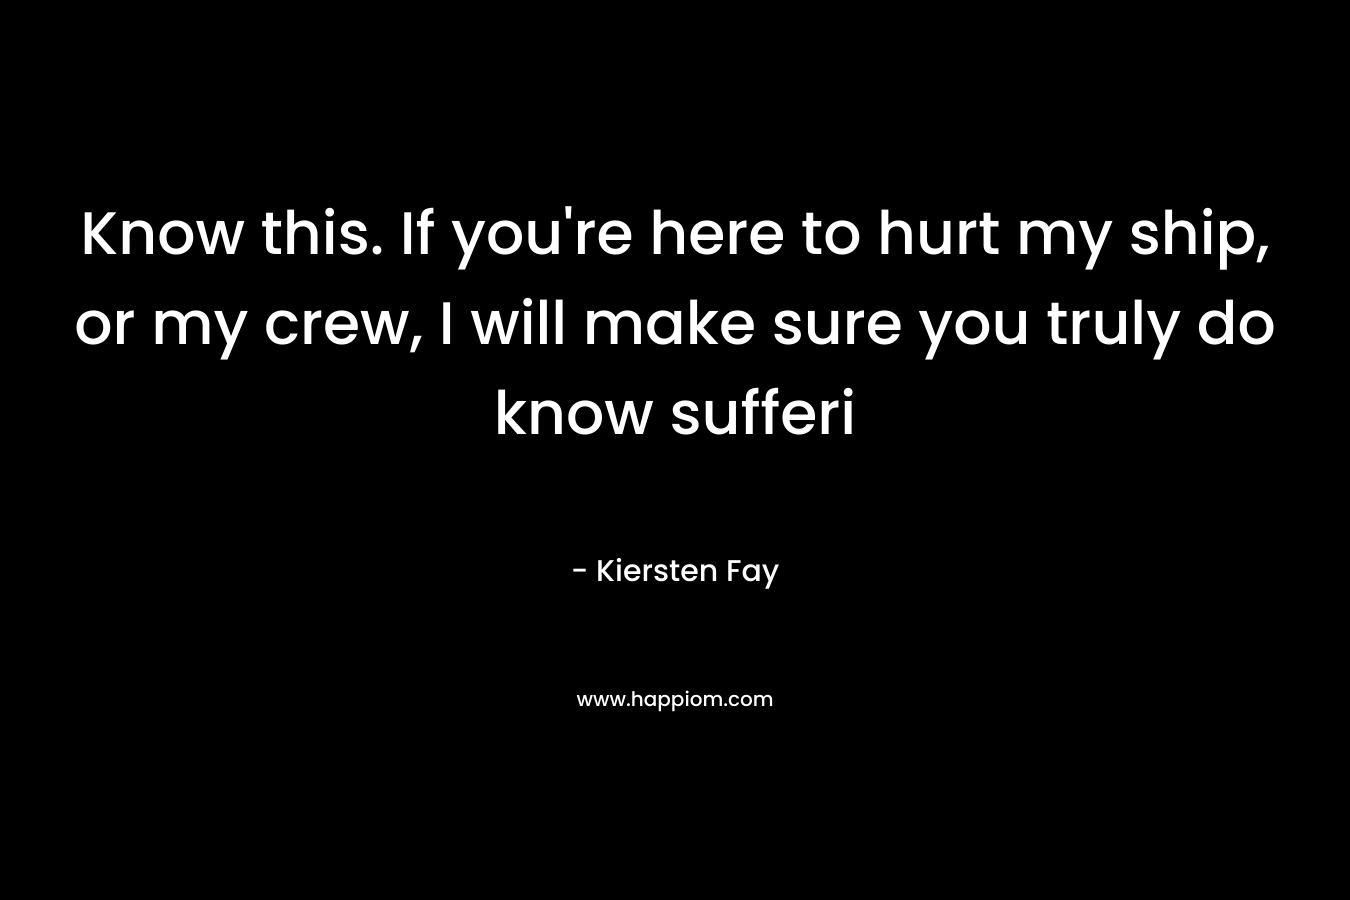 Know this. If you're here to hurt my ship, or my crew, I will make sure you truly do know sufferi